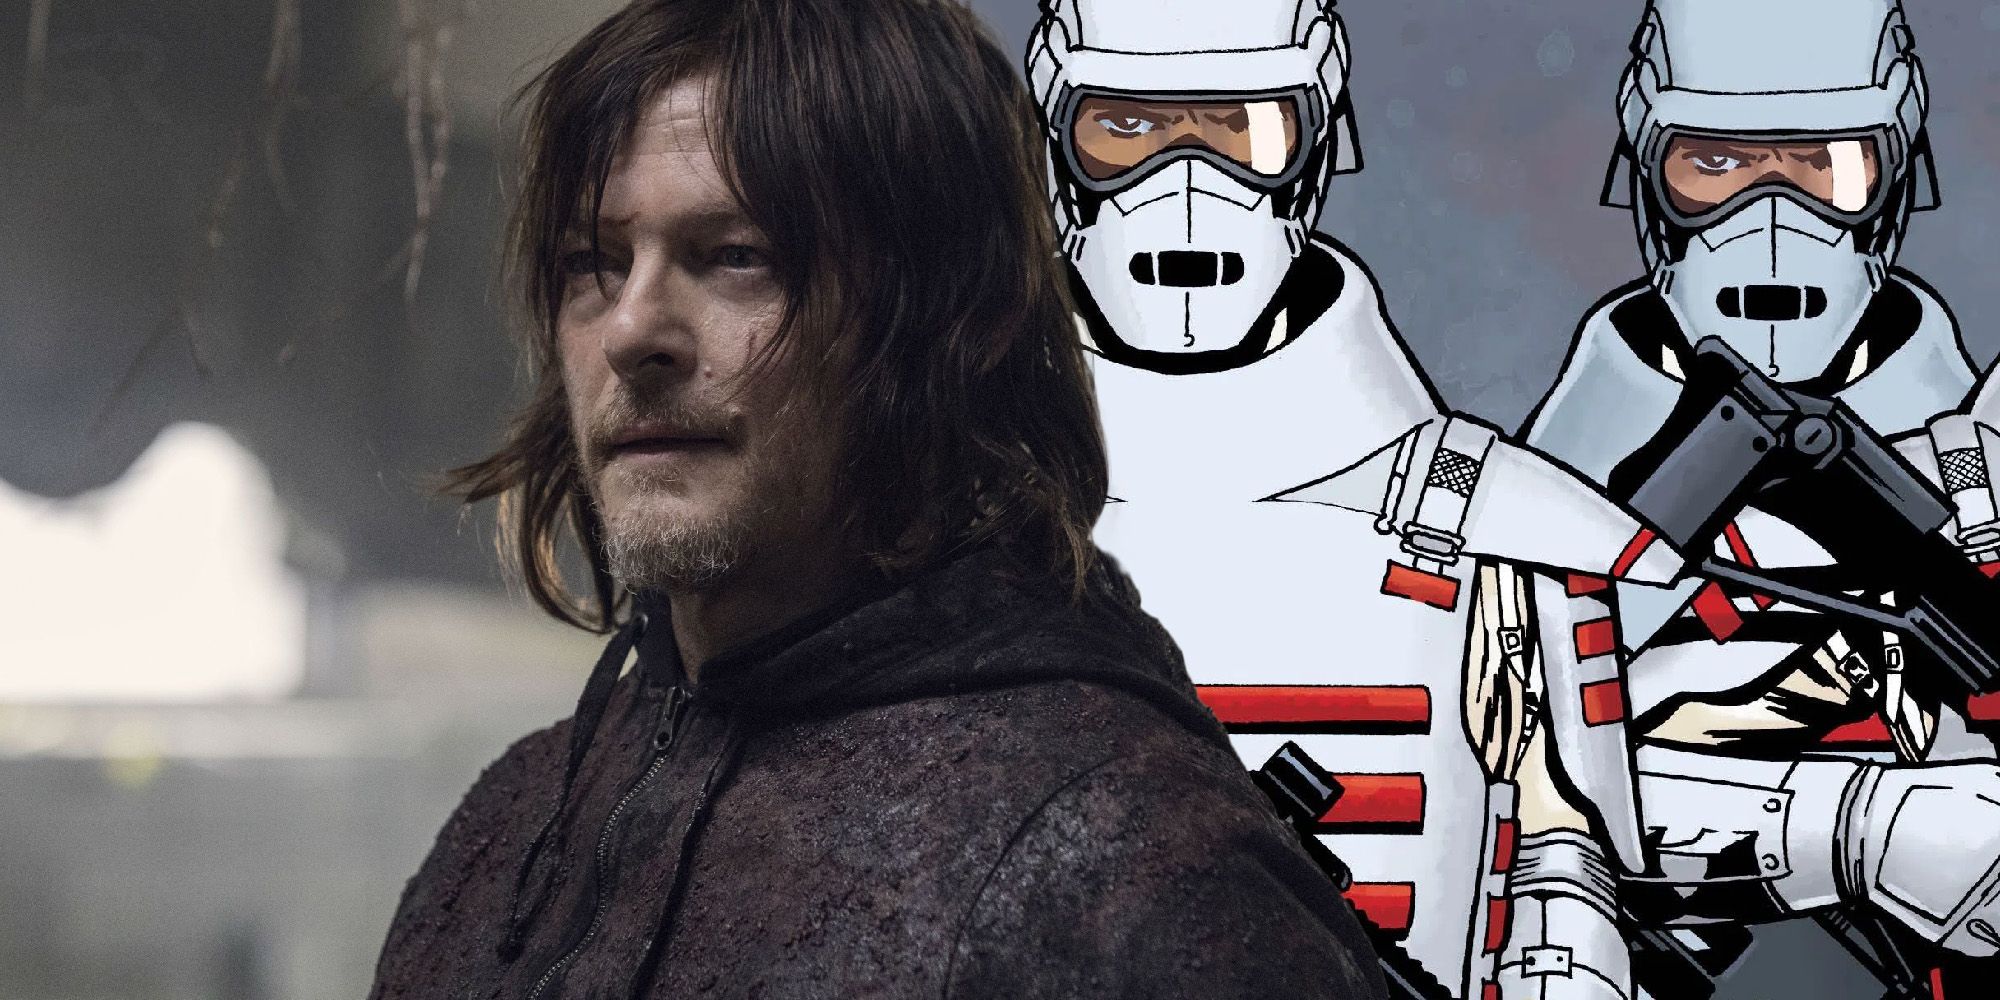 Daryl the walking dead the commenwealth soldiers